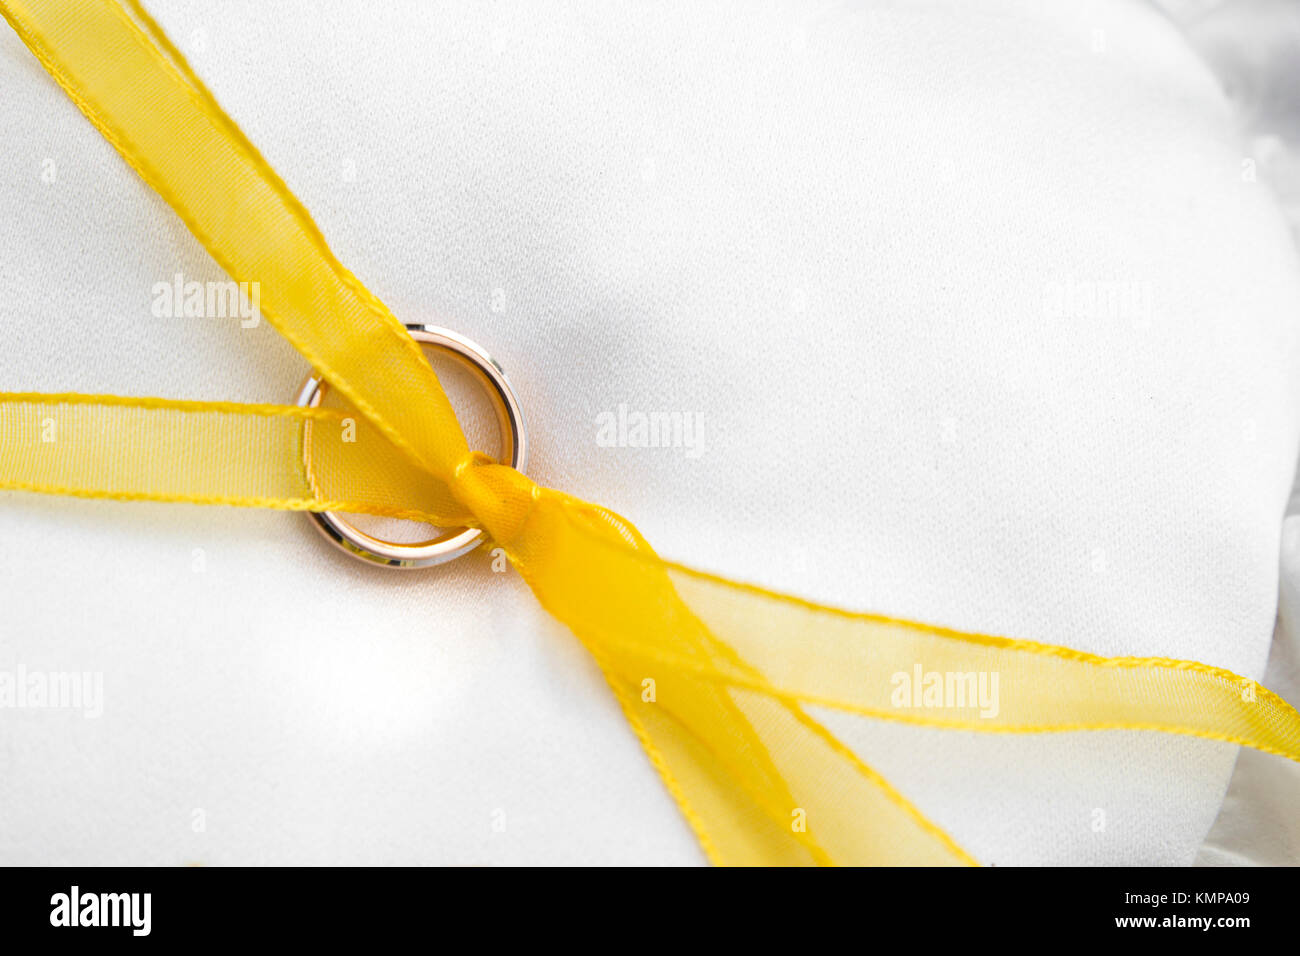 Wedding rings resting on a white pillow. Stock Photo